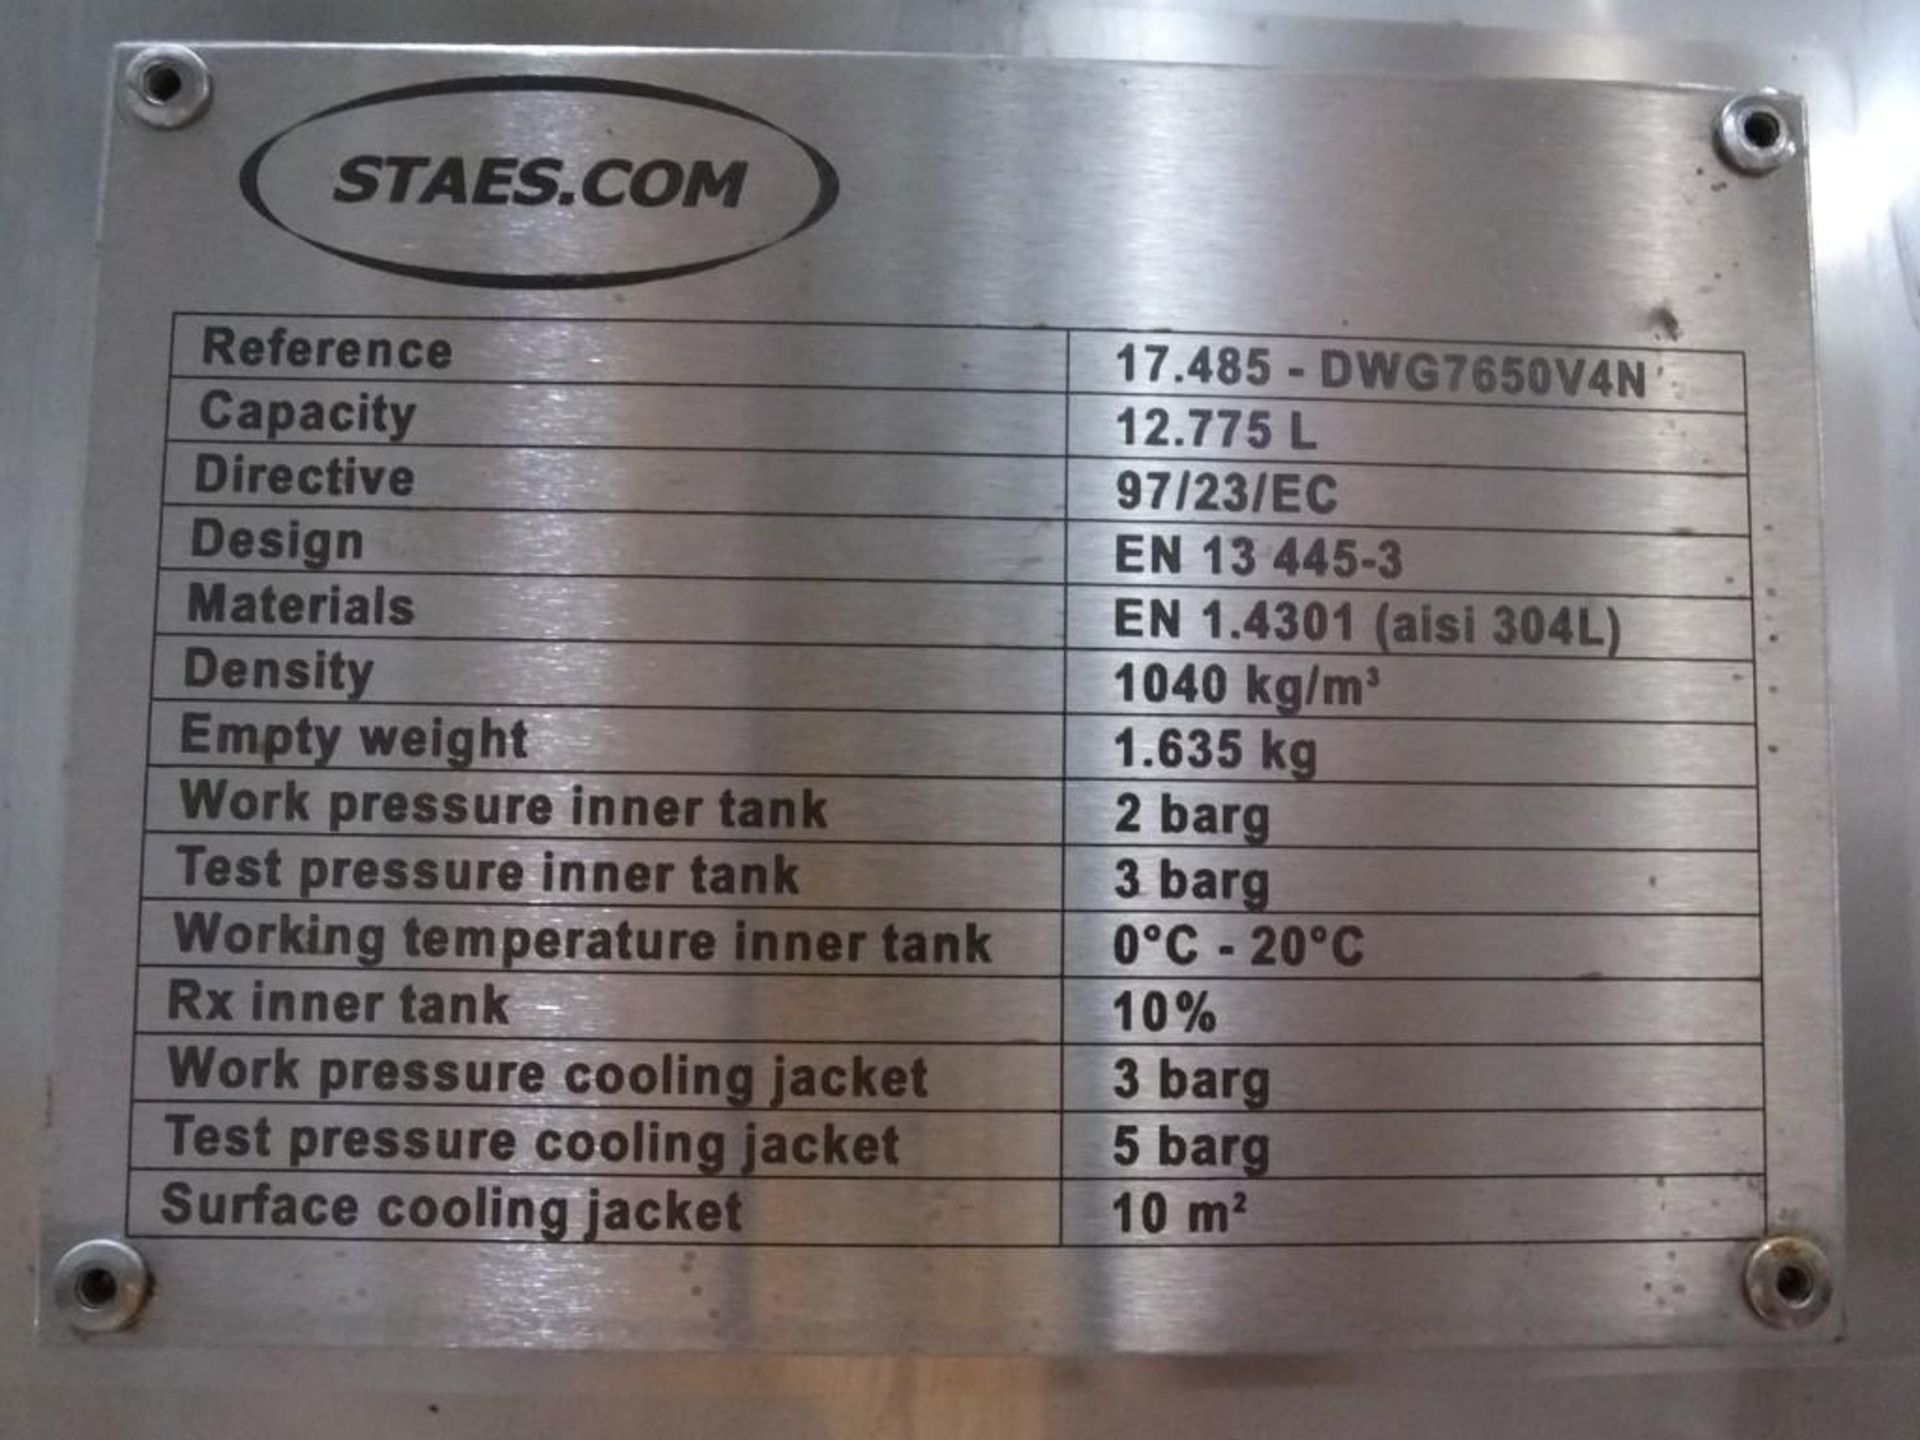 Staes CT20/BT7 100 BBL S/S Jacketed Tank - Image 4 of 7